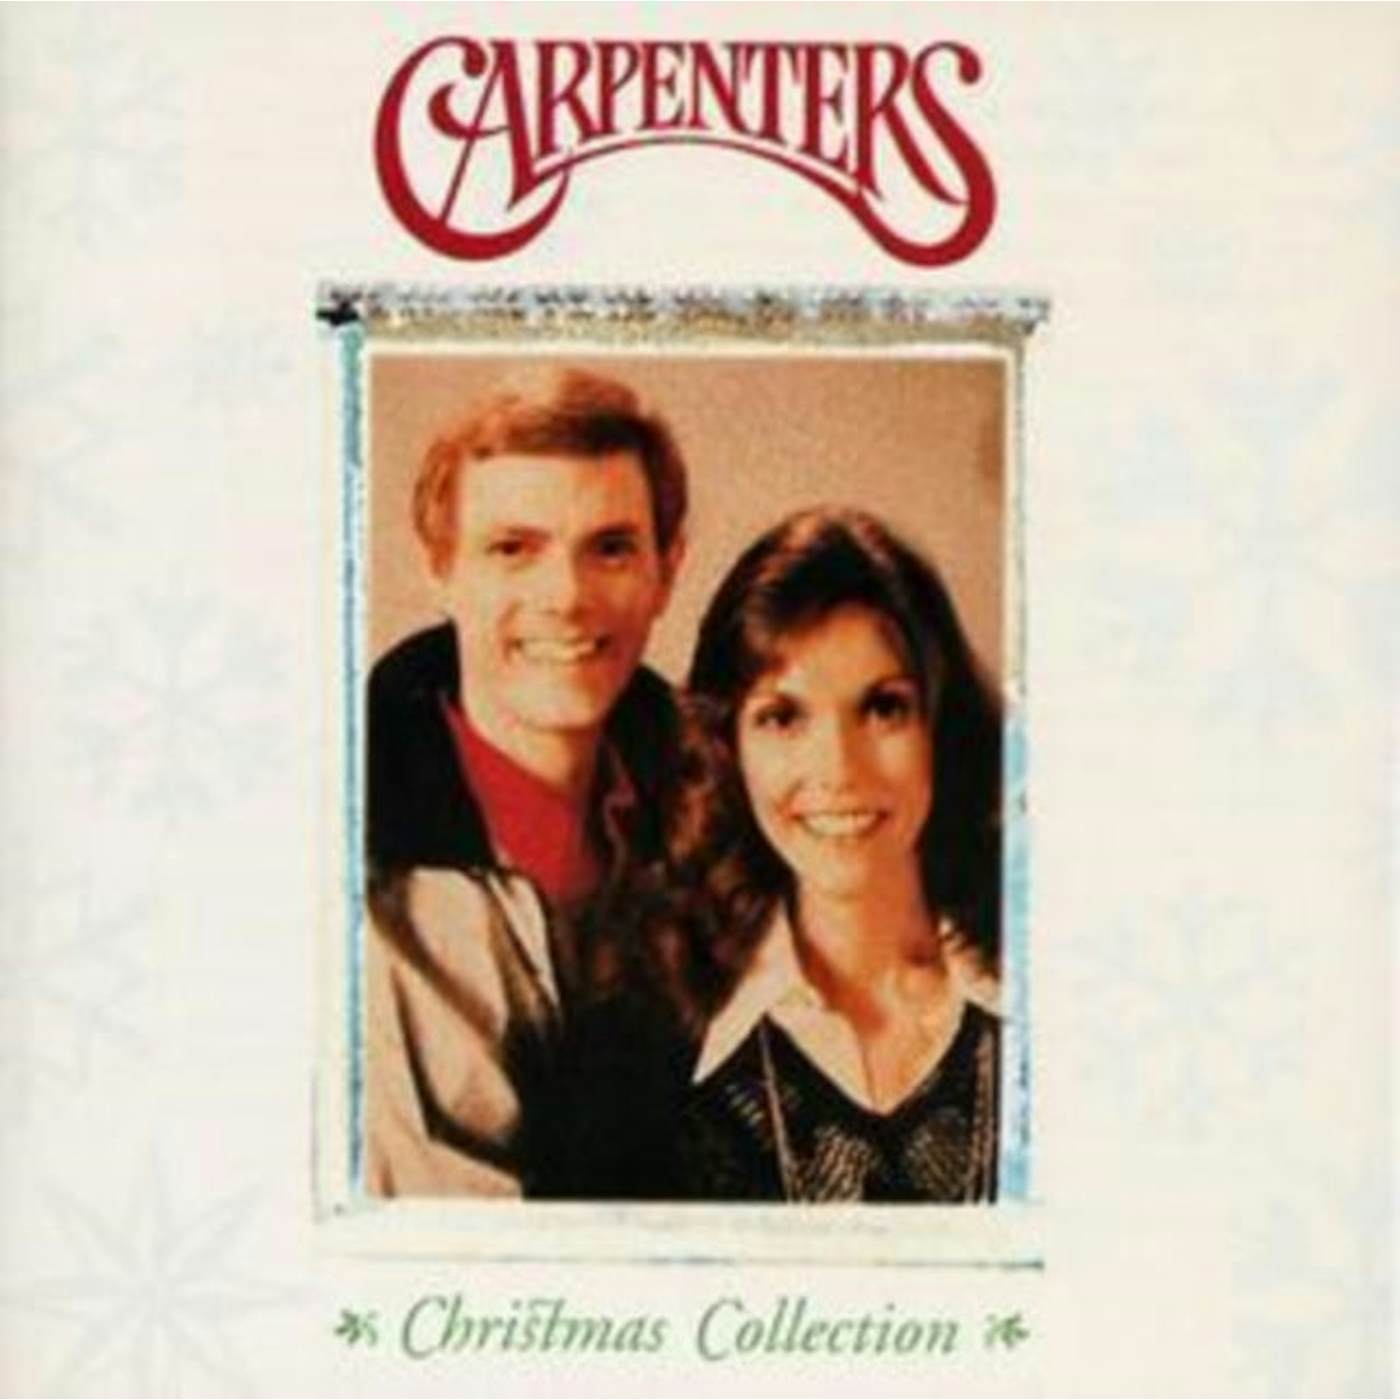 The Carpenters CD - Christmas Collection